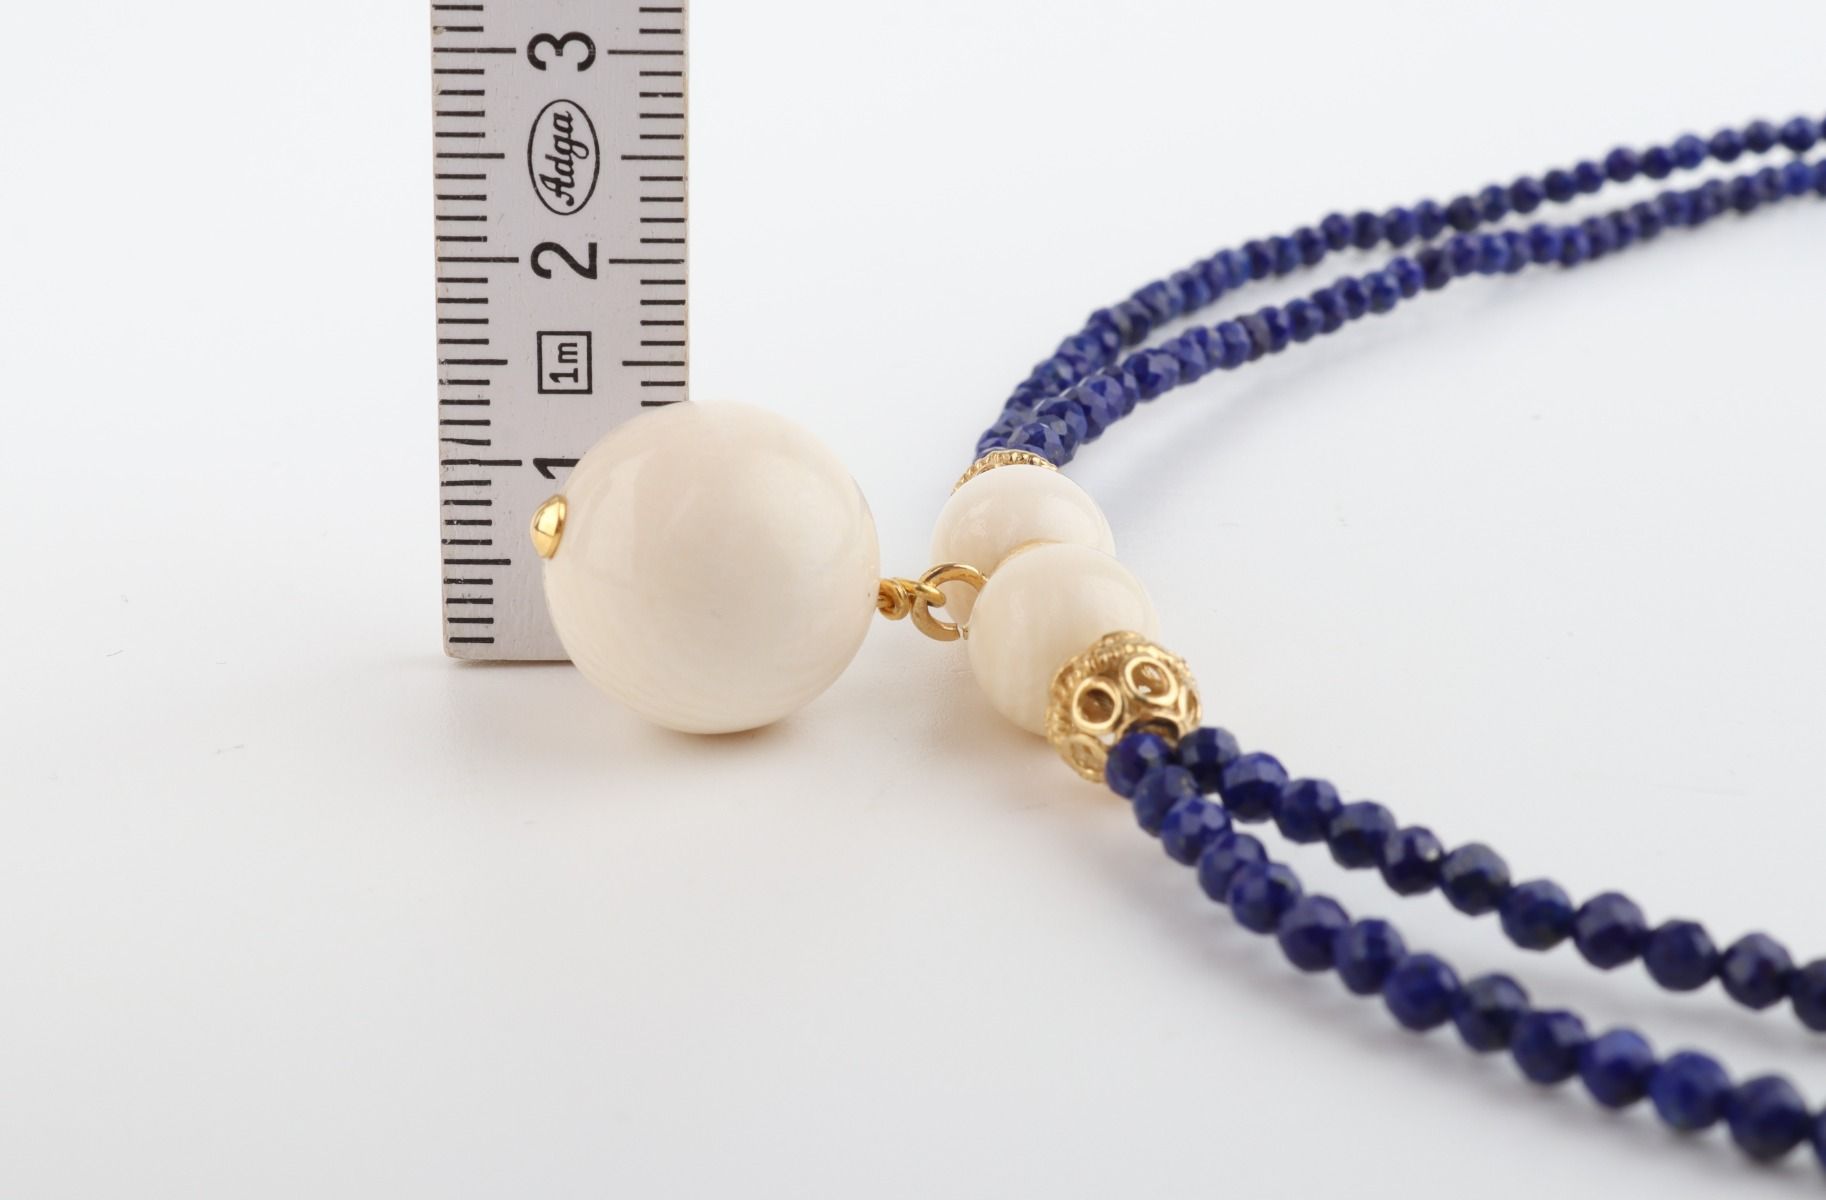 Faceted Lapis Lazuli & Mammoth Ivory Necklace